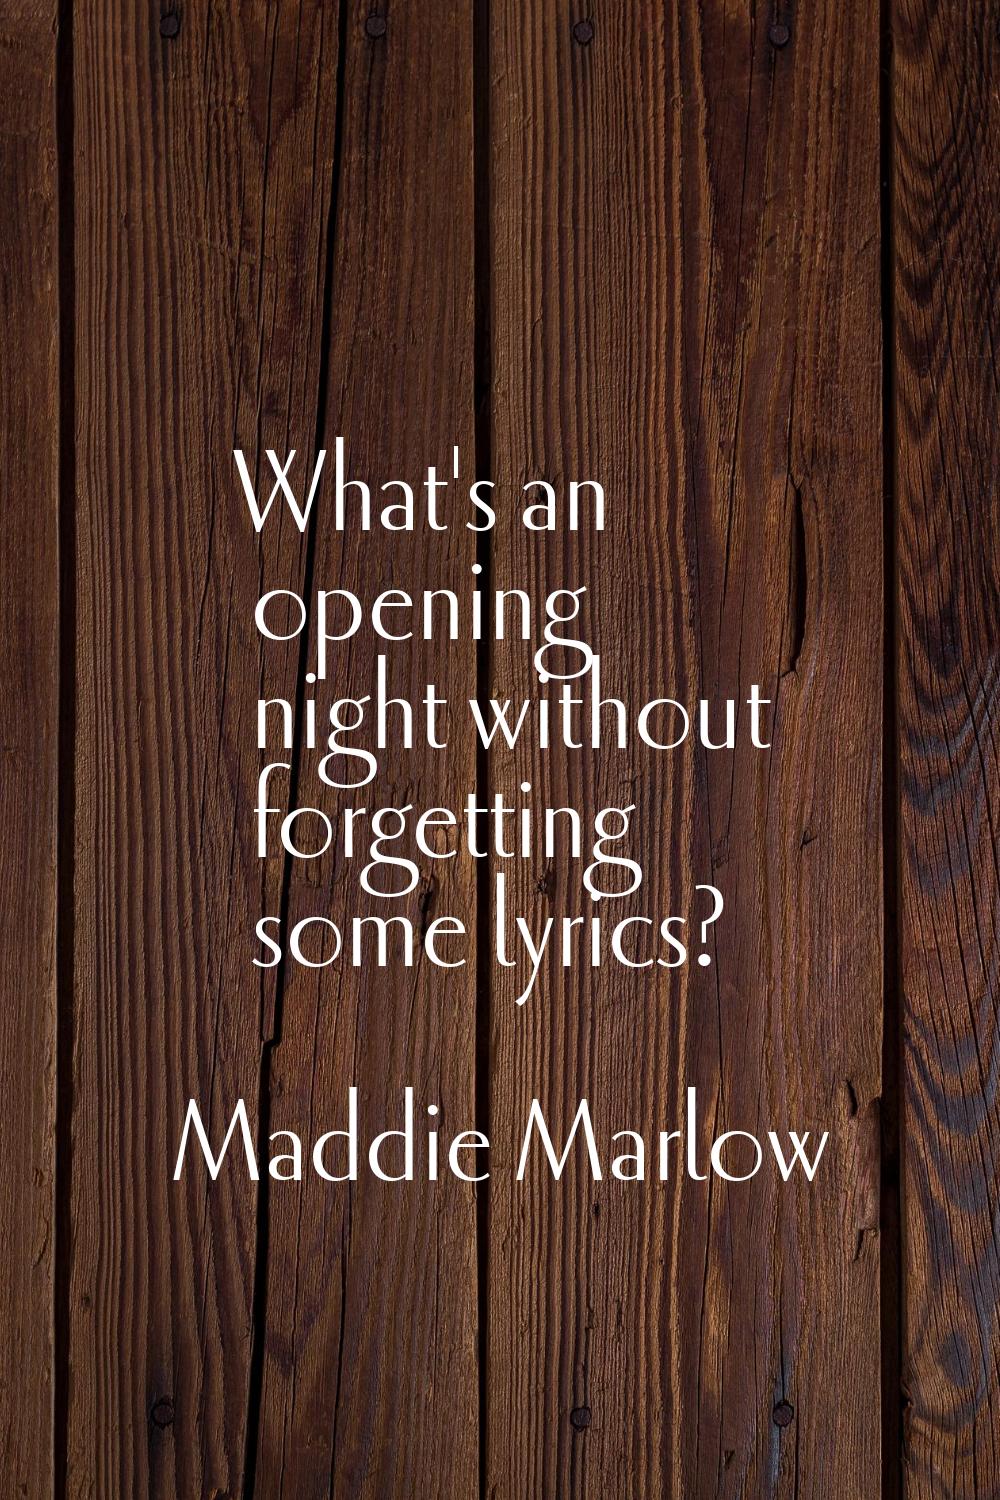 What's an opening night without forgetting some lyrics?